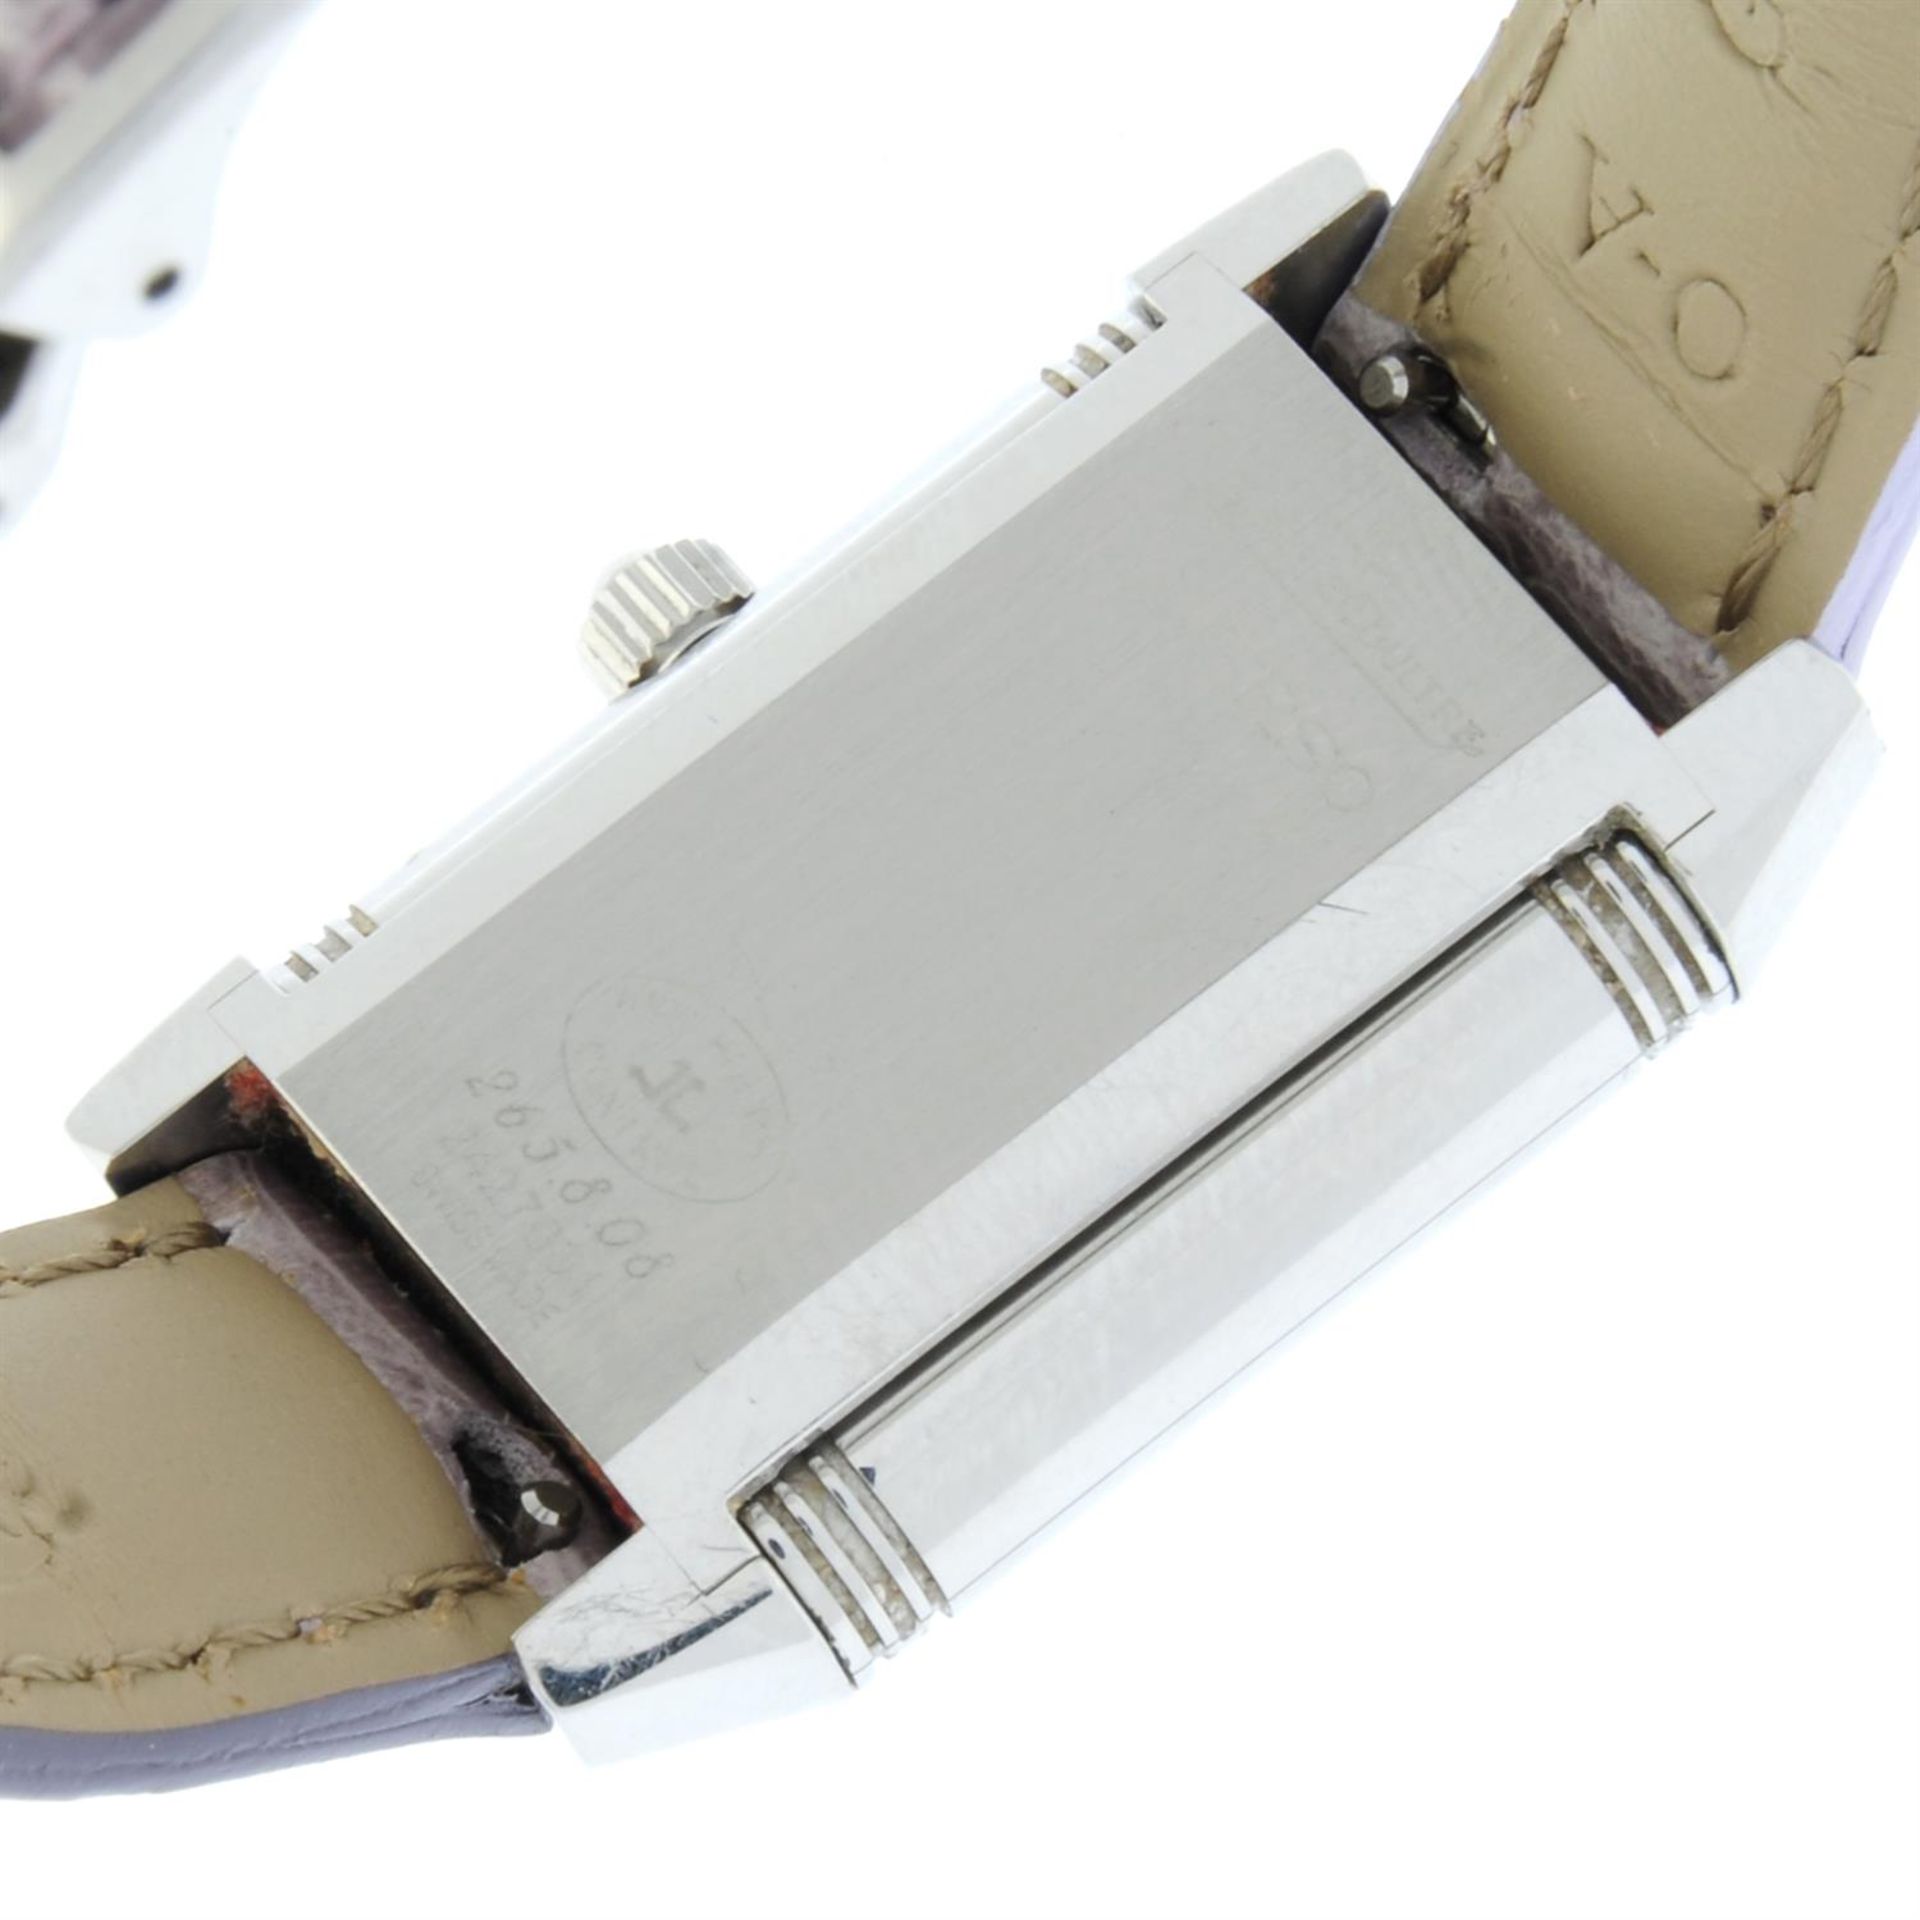 Jaeger-LeCoultre - a Reverso Florale watch, 20mm. - Image 5 of 6